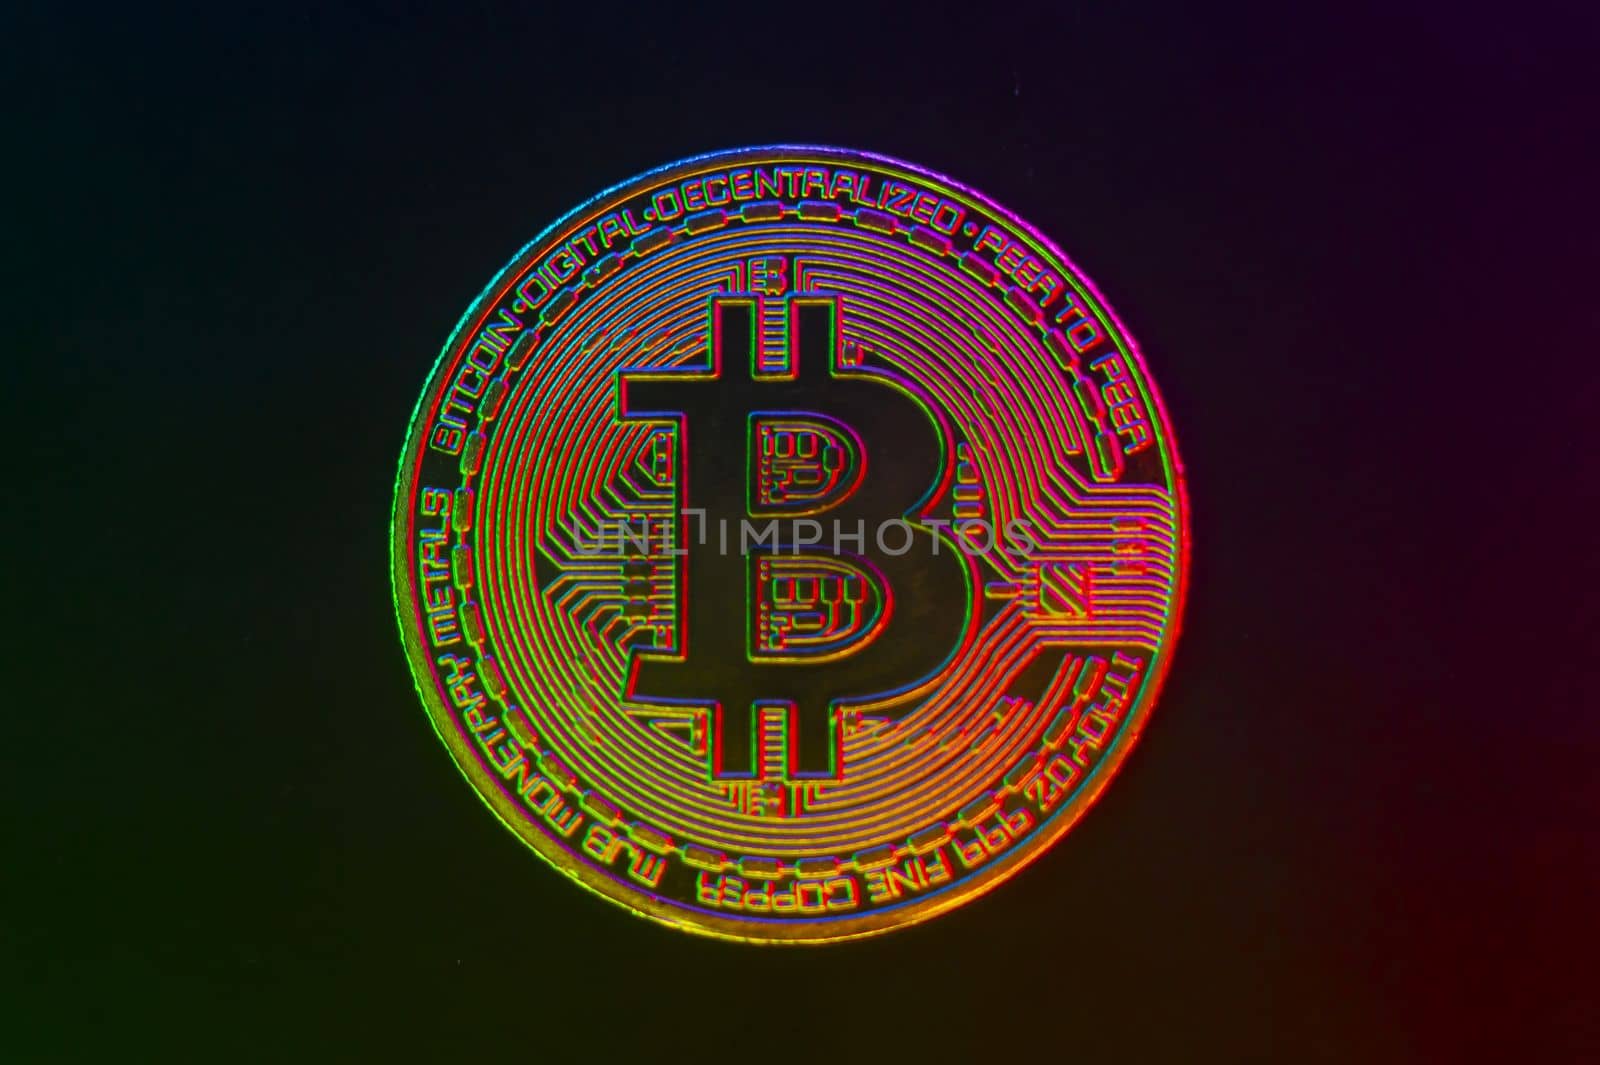 Crypto currency golden coin with bitcoin symbol on isolated on black background. Bitcoin Coin on black background. Bitcoin cryptocurrency. Cryptocurrency Coin Concept. single golden valuable